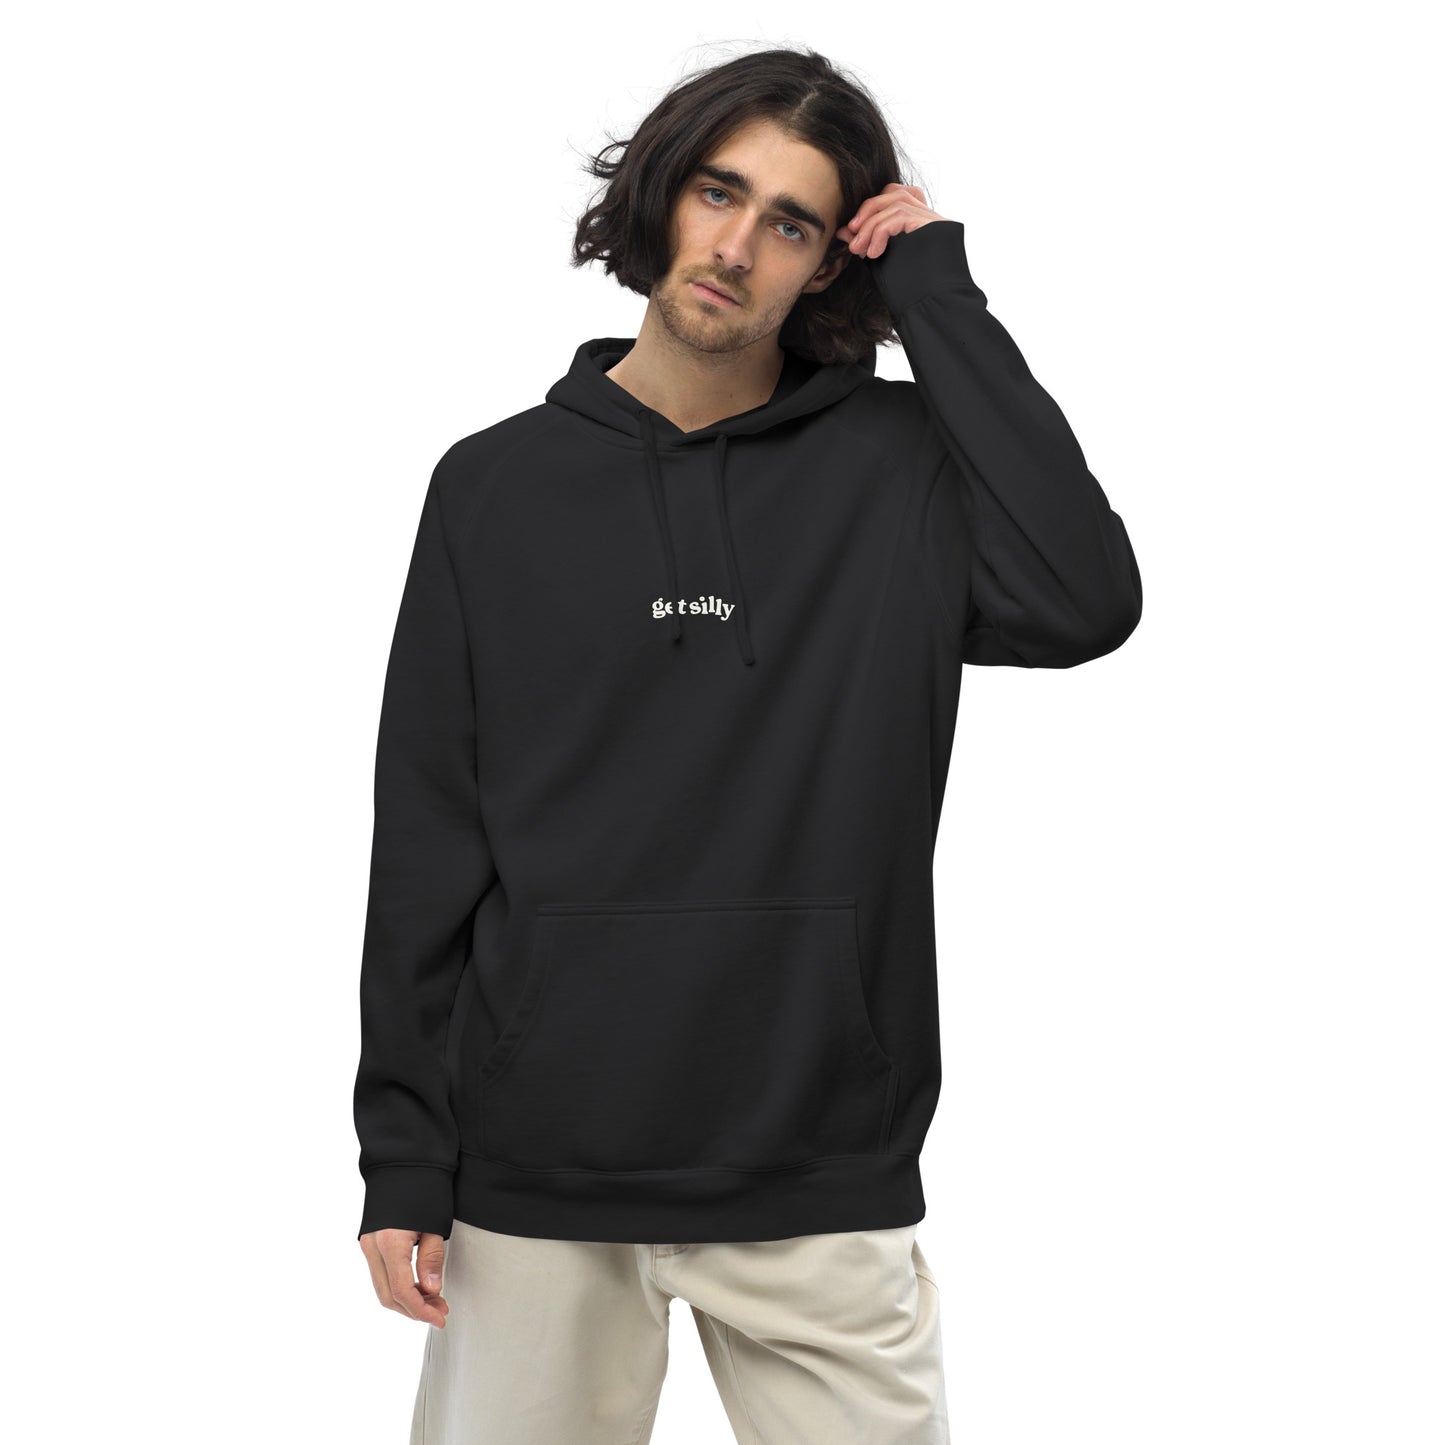 Get Silly Coal Hoodie